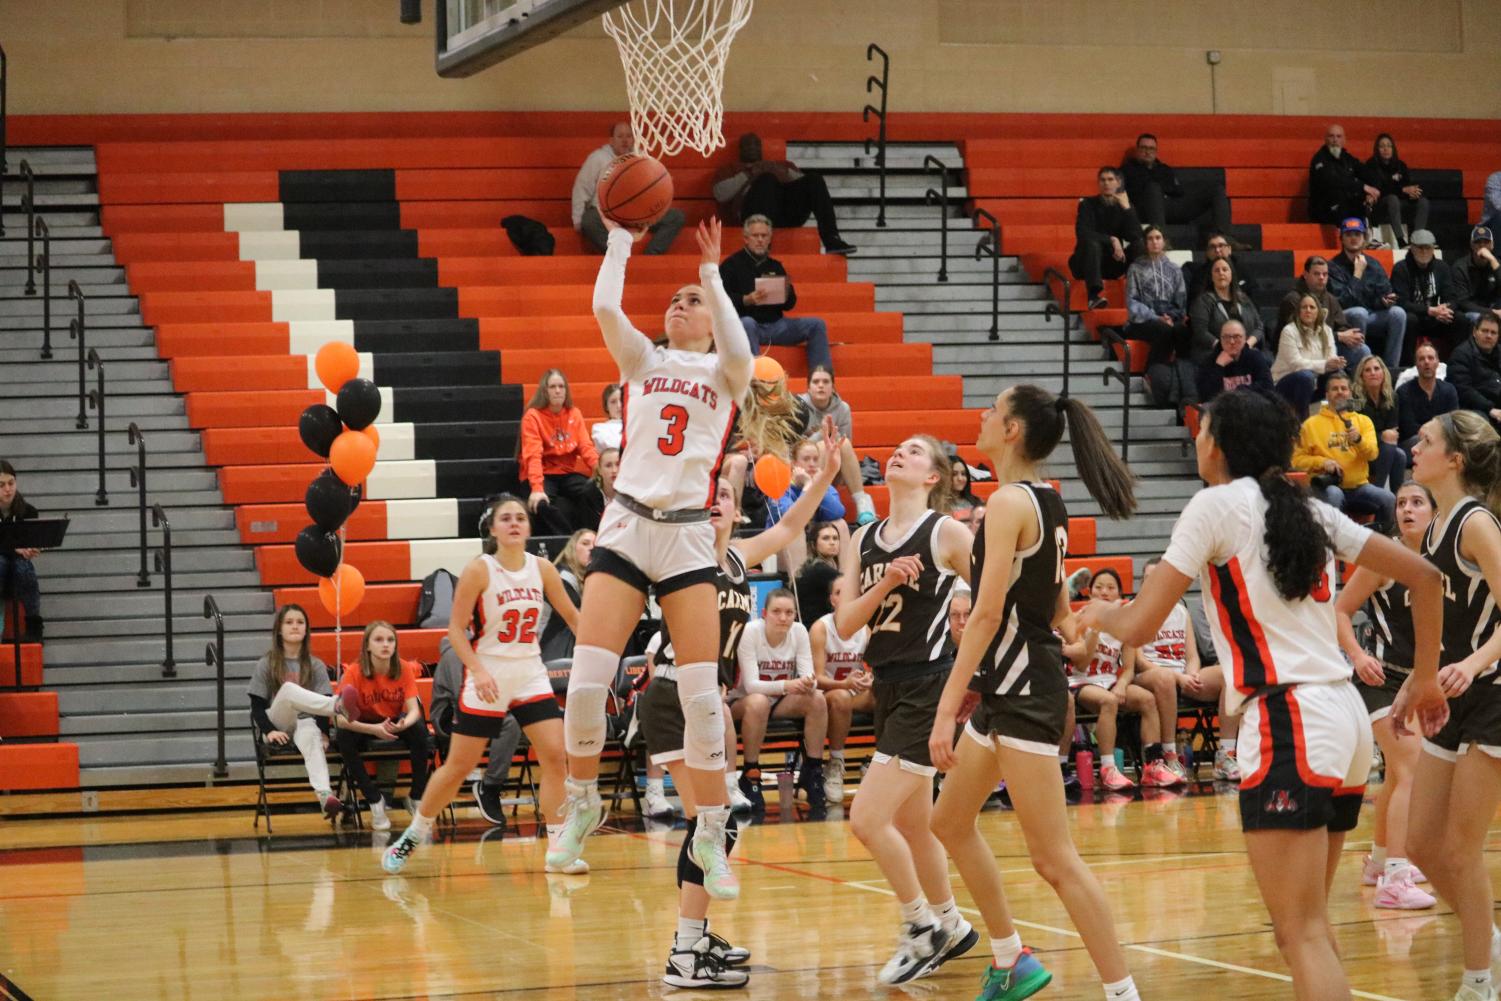 Senior Emily Fisher (3) starts off the fourth quarter with a layup, carrying the Wildcats to a lead of 41-39.